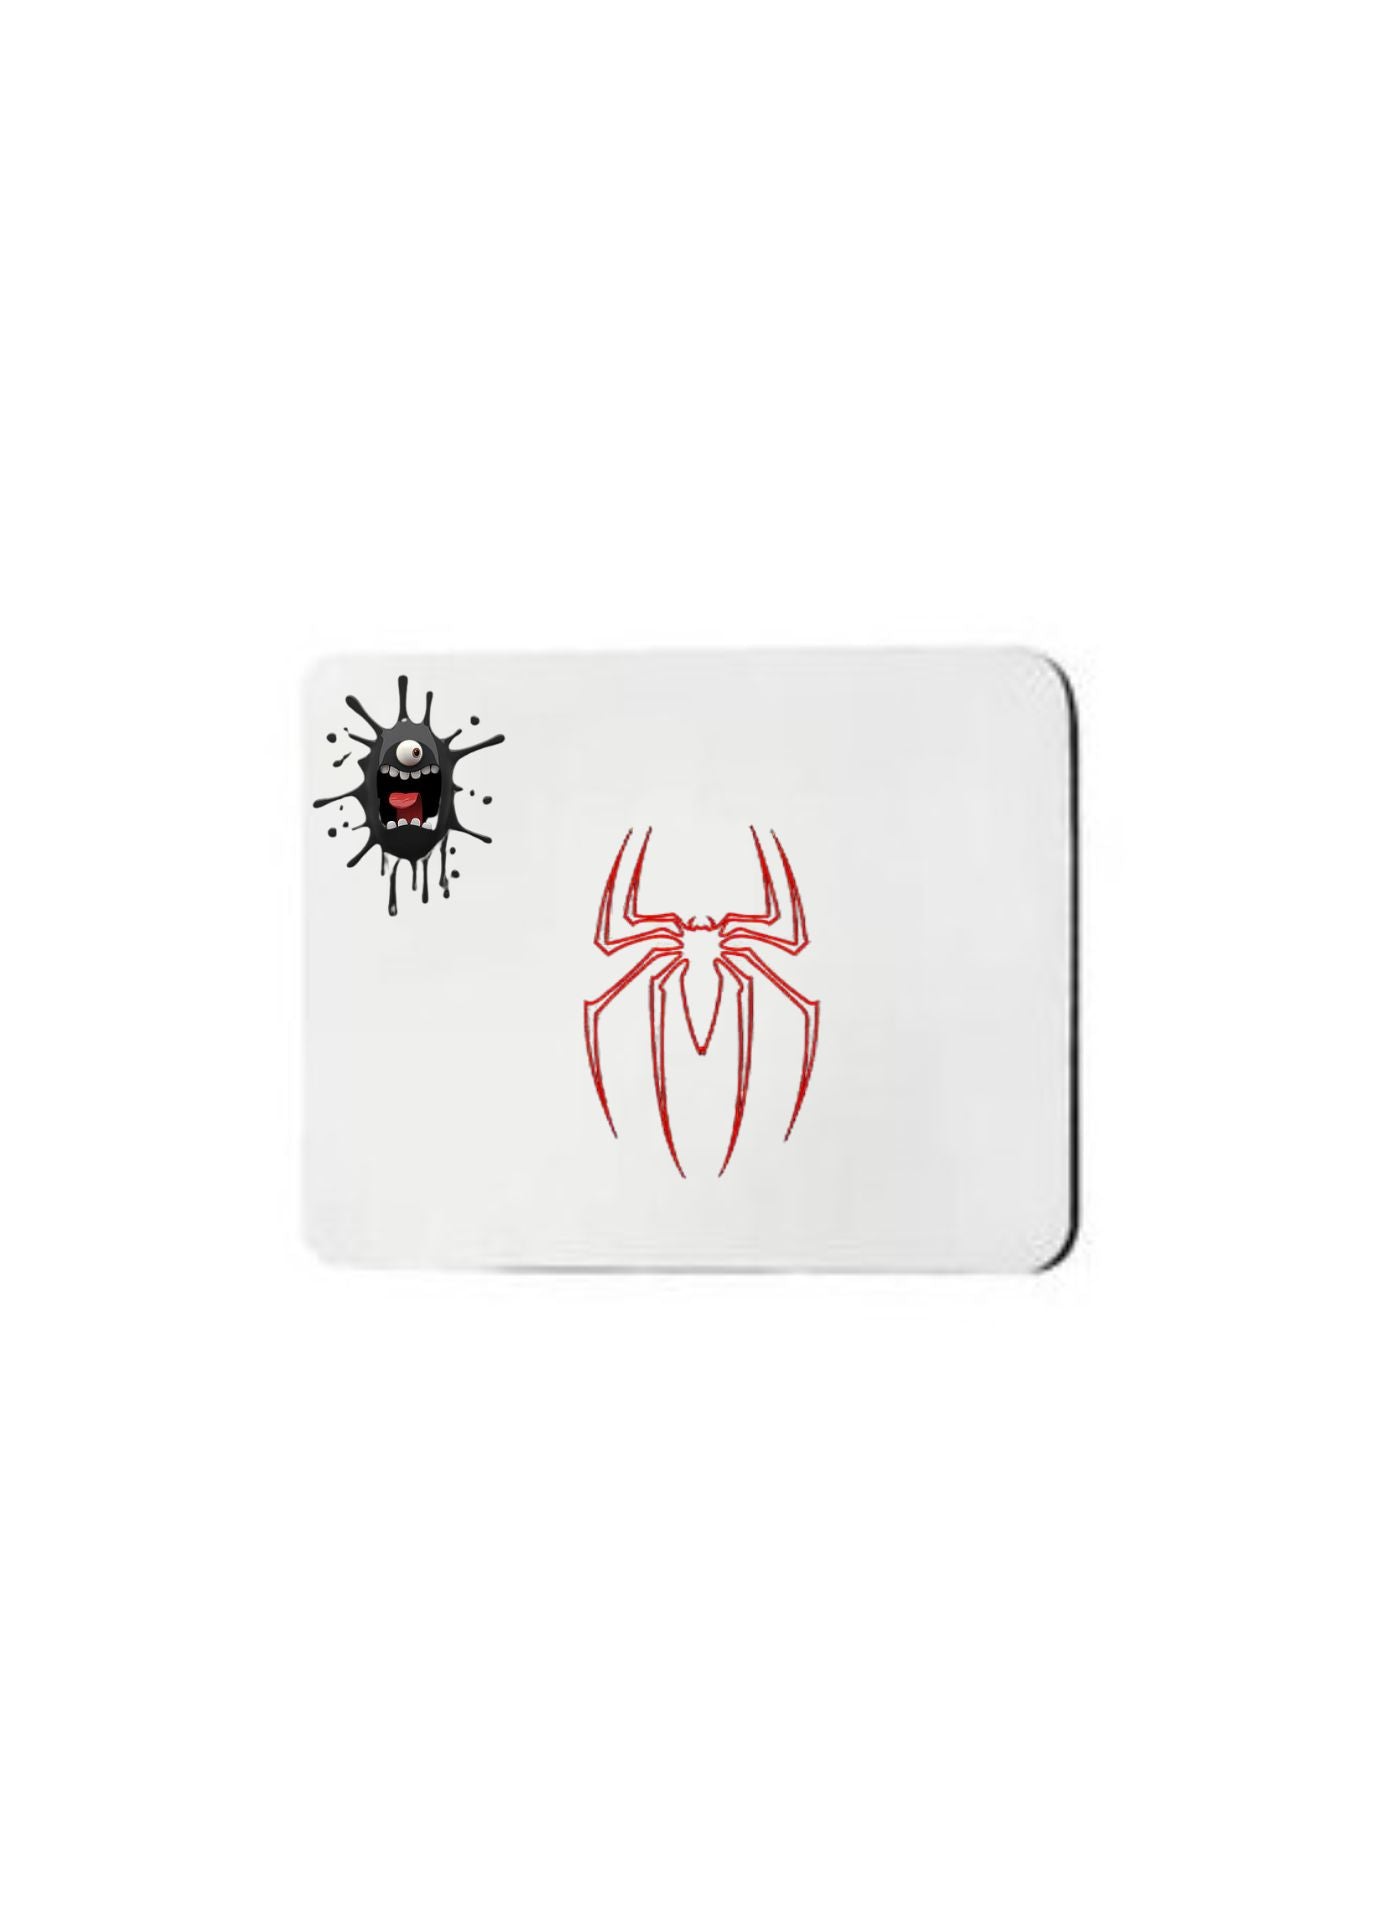 Customizable Mouse Pad - Personalize Your Workspace!